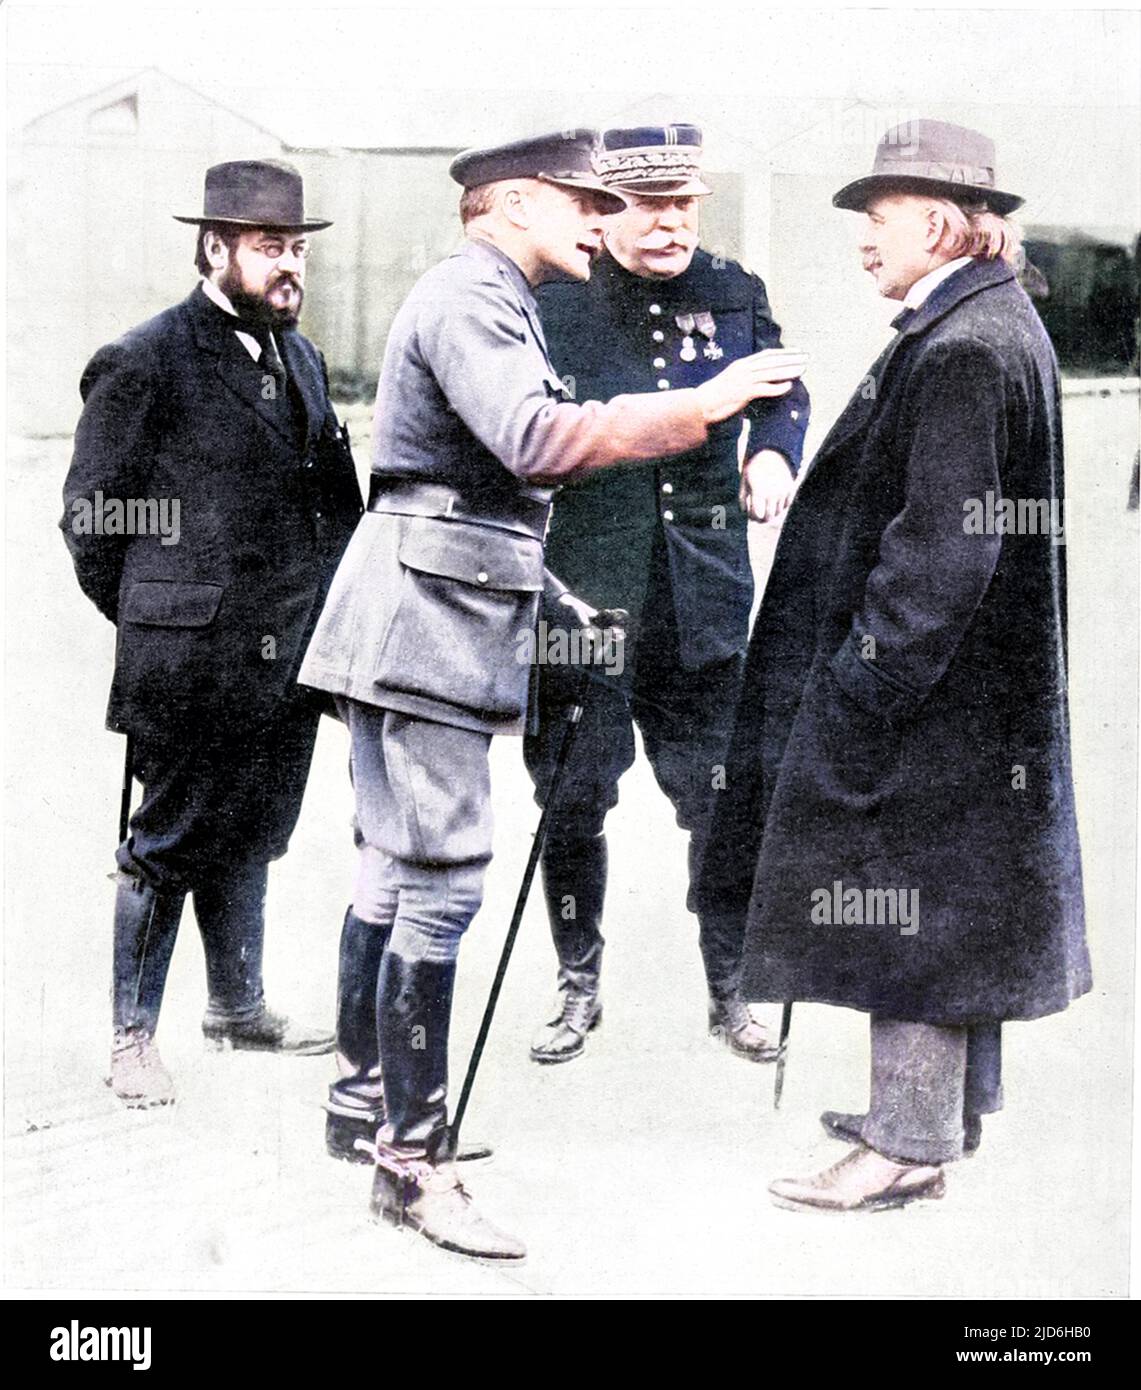 Meeting between political and military leaders of the Allies in France, 1916. The group includes Field Marshal Sir Douglas Haig (1861-1928), Commander-in-Chief of the British army and General Joseph Joffre (1852-1931), Commander of the French army. Also pictured are the British Secretary for War and later Prime Minister David Lloyd George (1863-1945) with the French Minister of Munitions, Albert Thomas. Colourised version of: 10219677       Date: 1916 Stock Photo